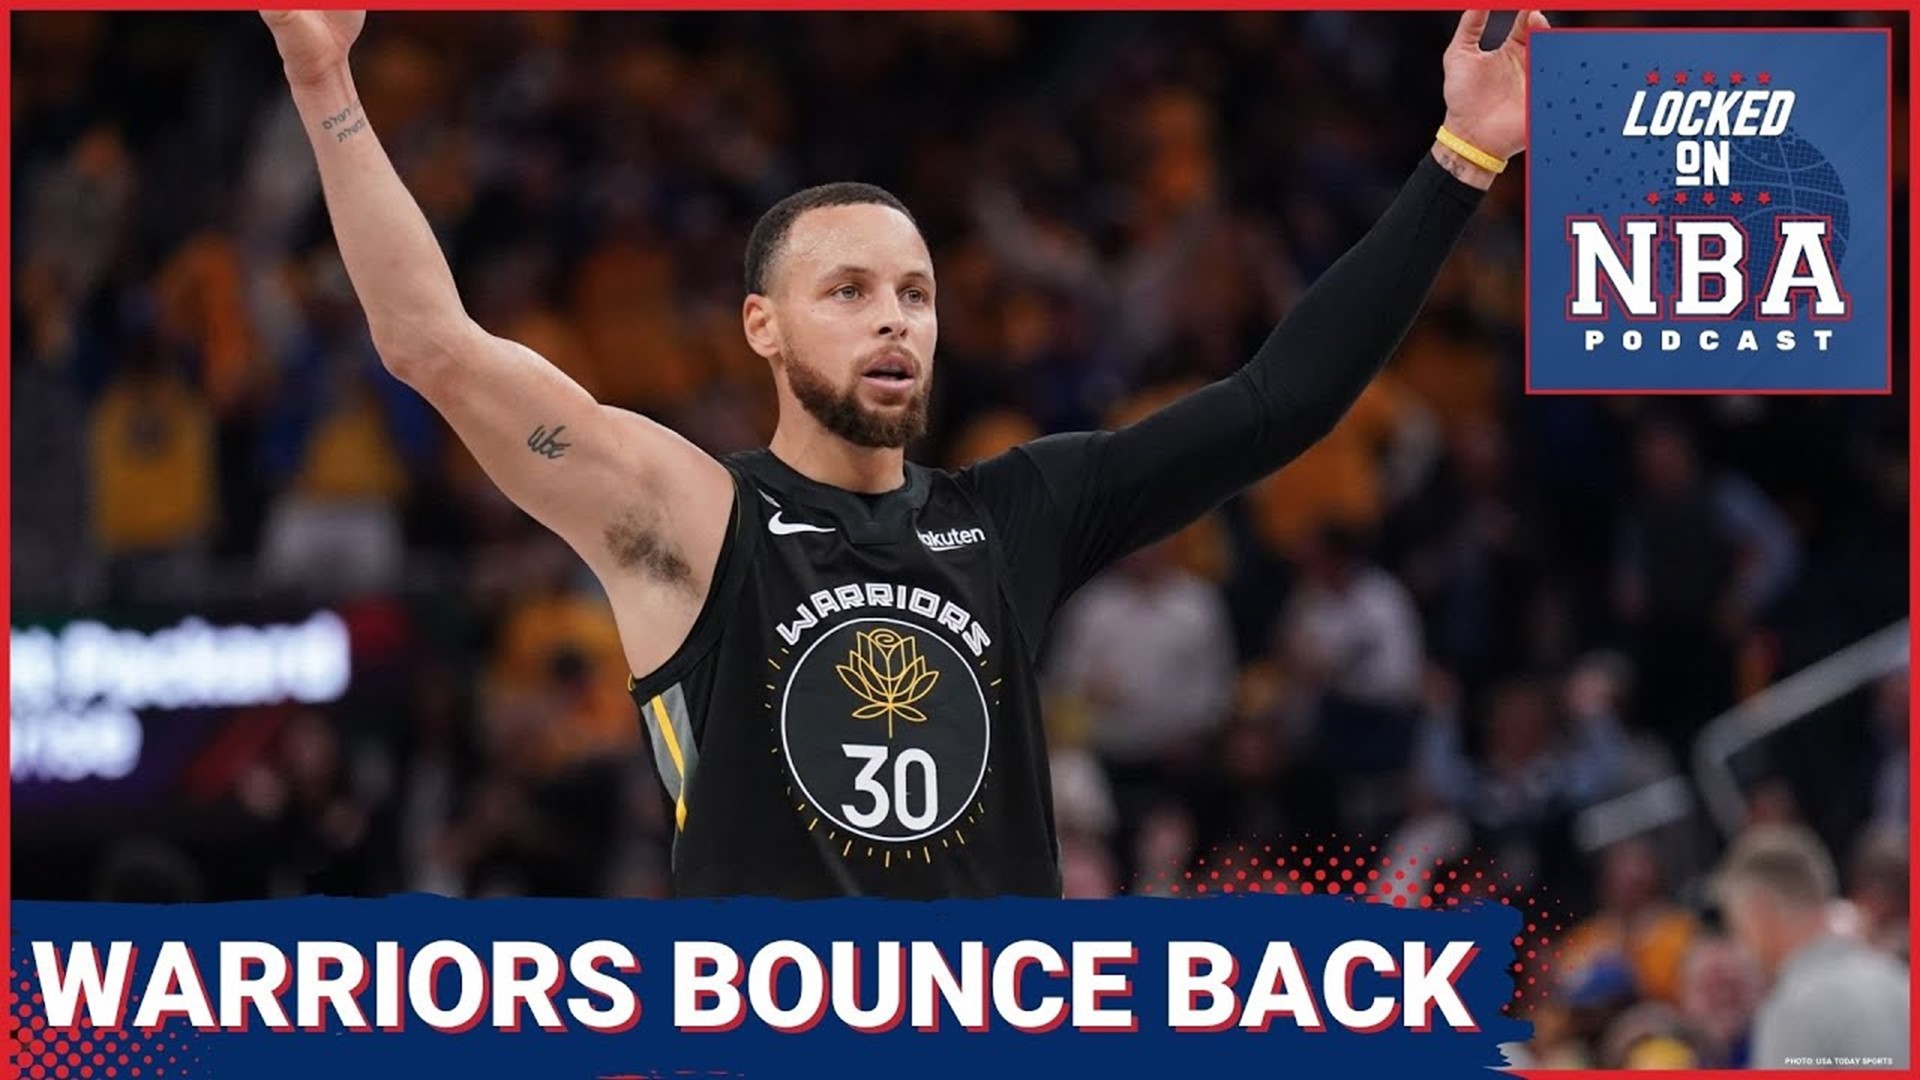 Warriors Return Home and Get Win Over Kings, Officiating in 76ers-Nets, Kawhi Leonard is Hurt Again